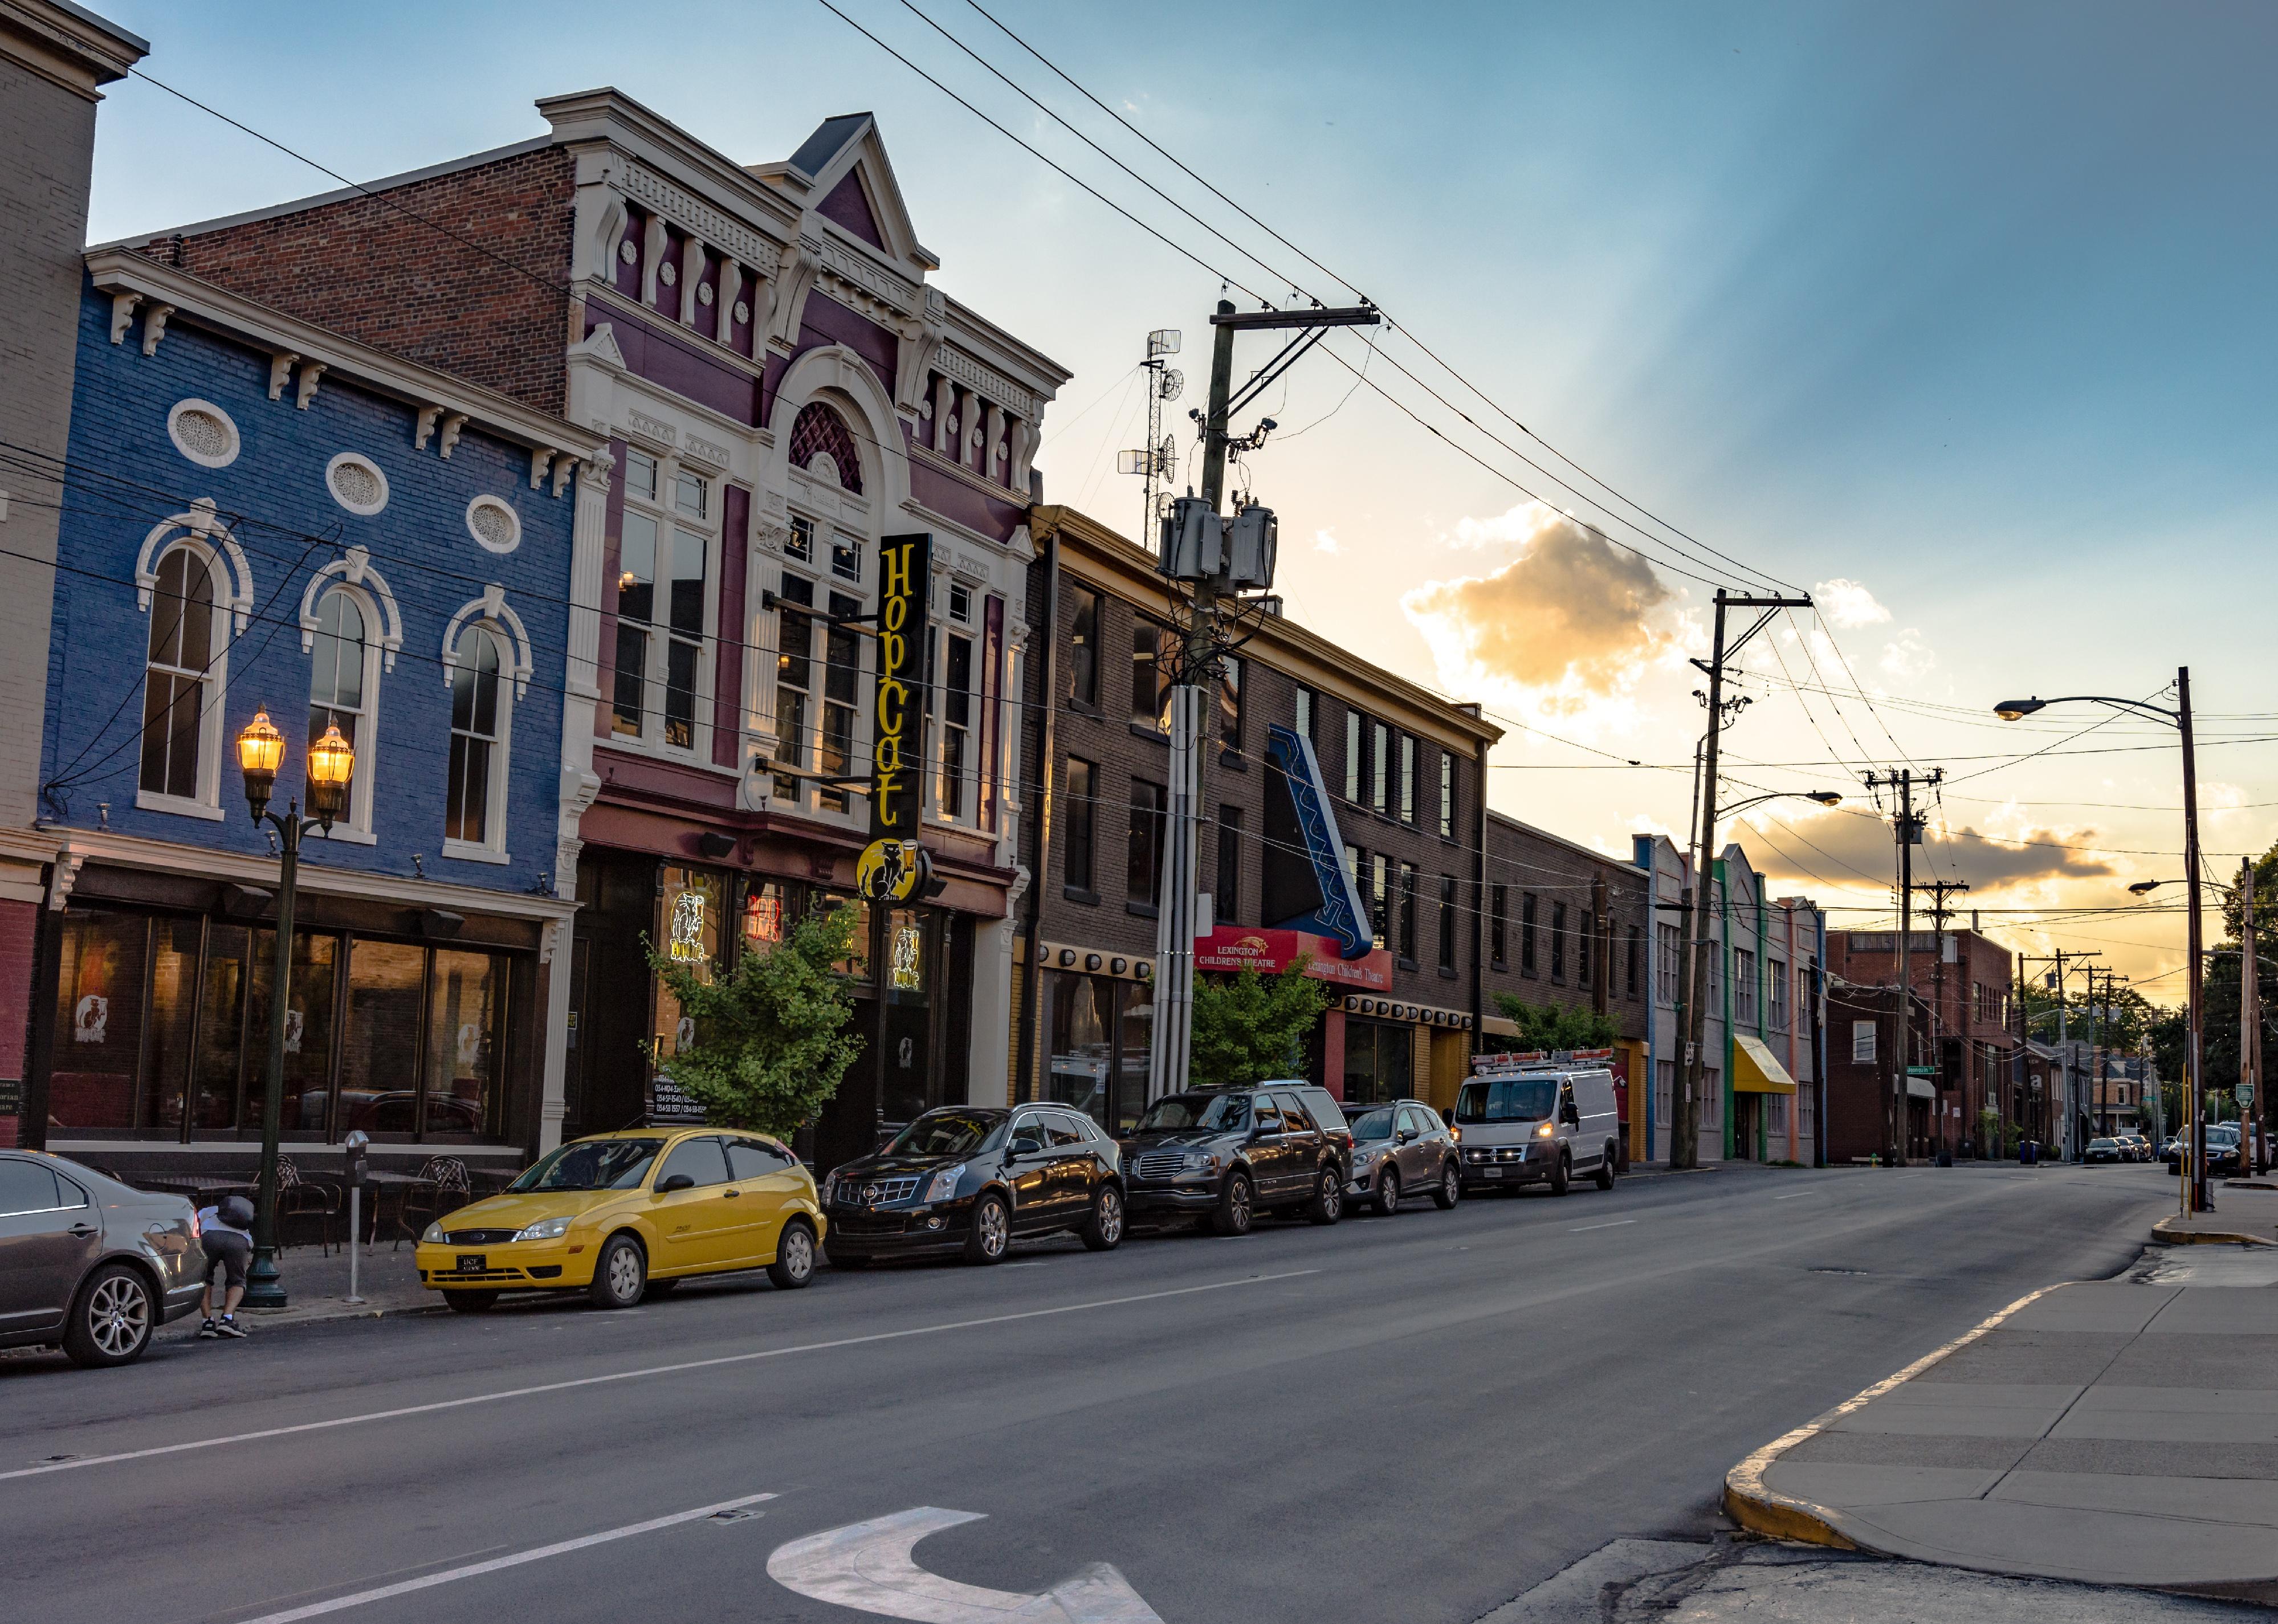 A view of the historic buildings down Short Street in Lexington.